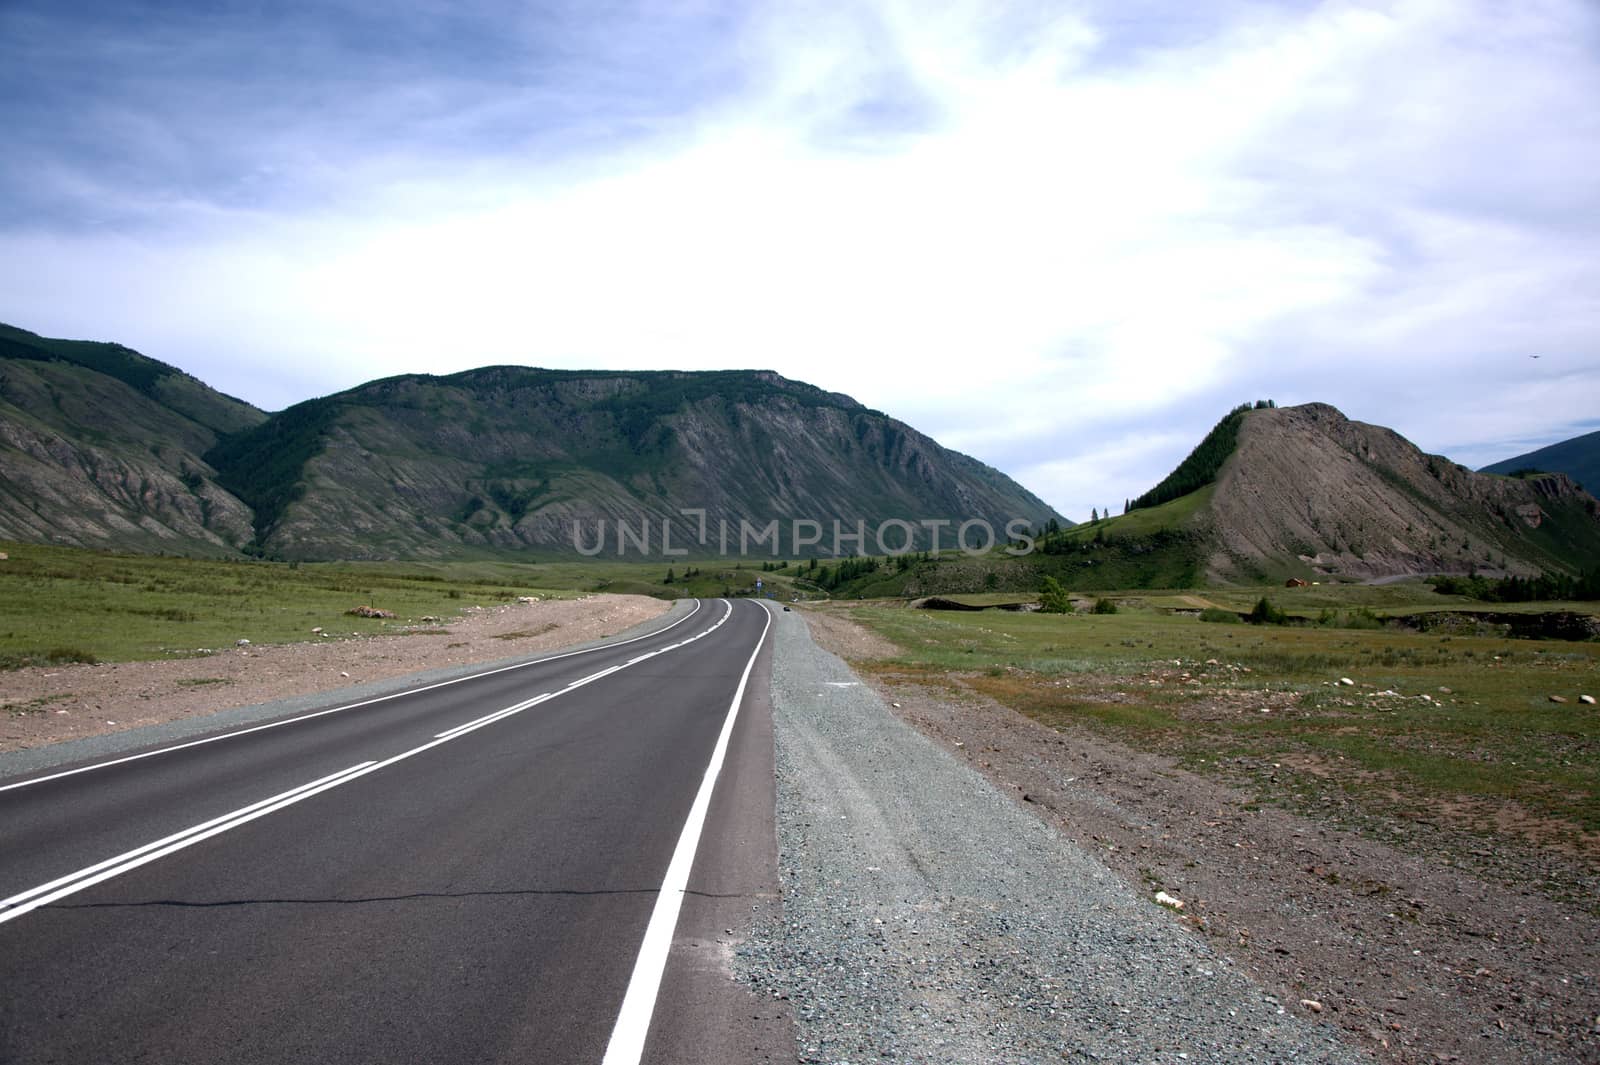 A direct asphalt road running through a valley surrounded by mountains. Altai, Siberia, Russia.